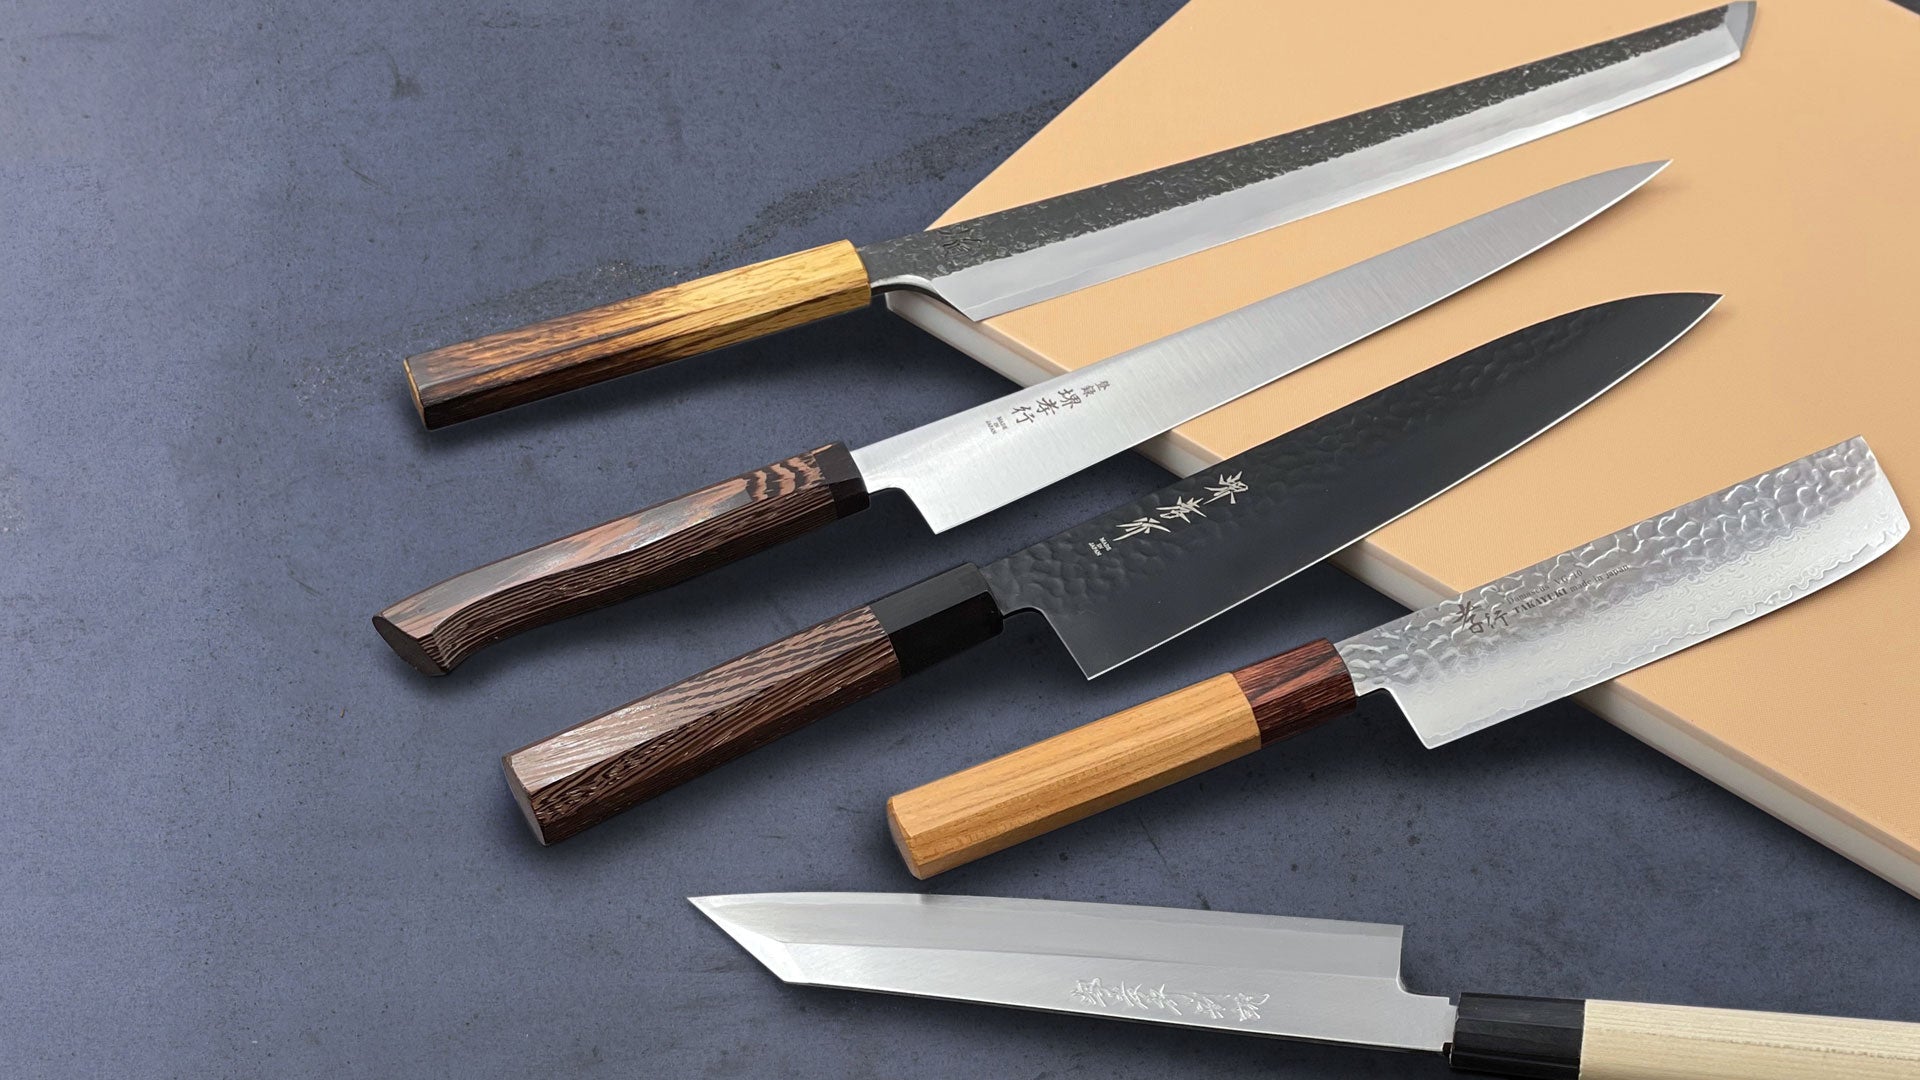 Yaxell-Knives from Japan  Superior high-quality kitchen knives